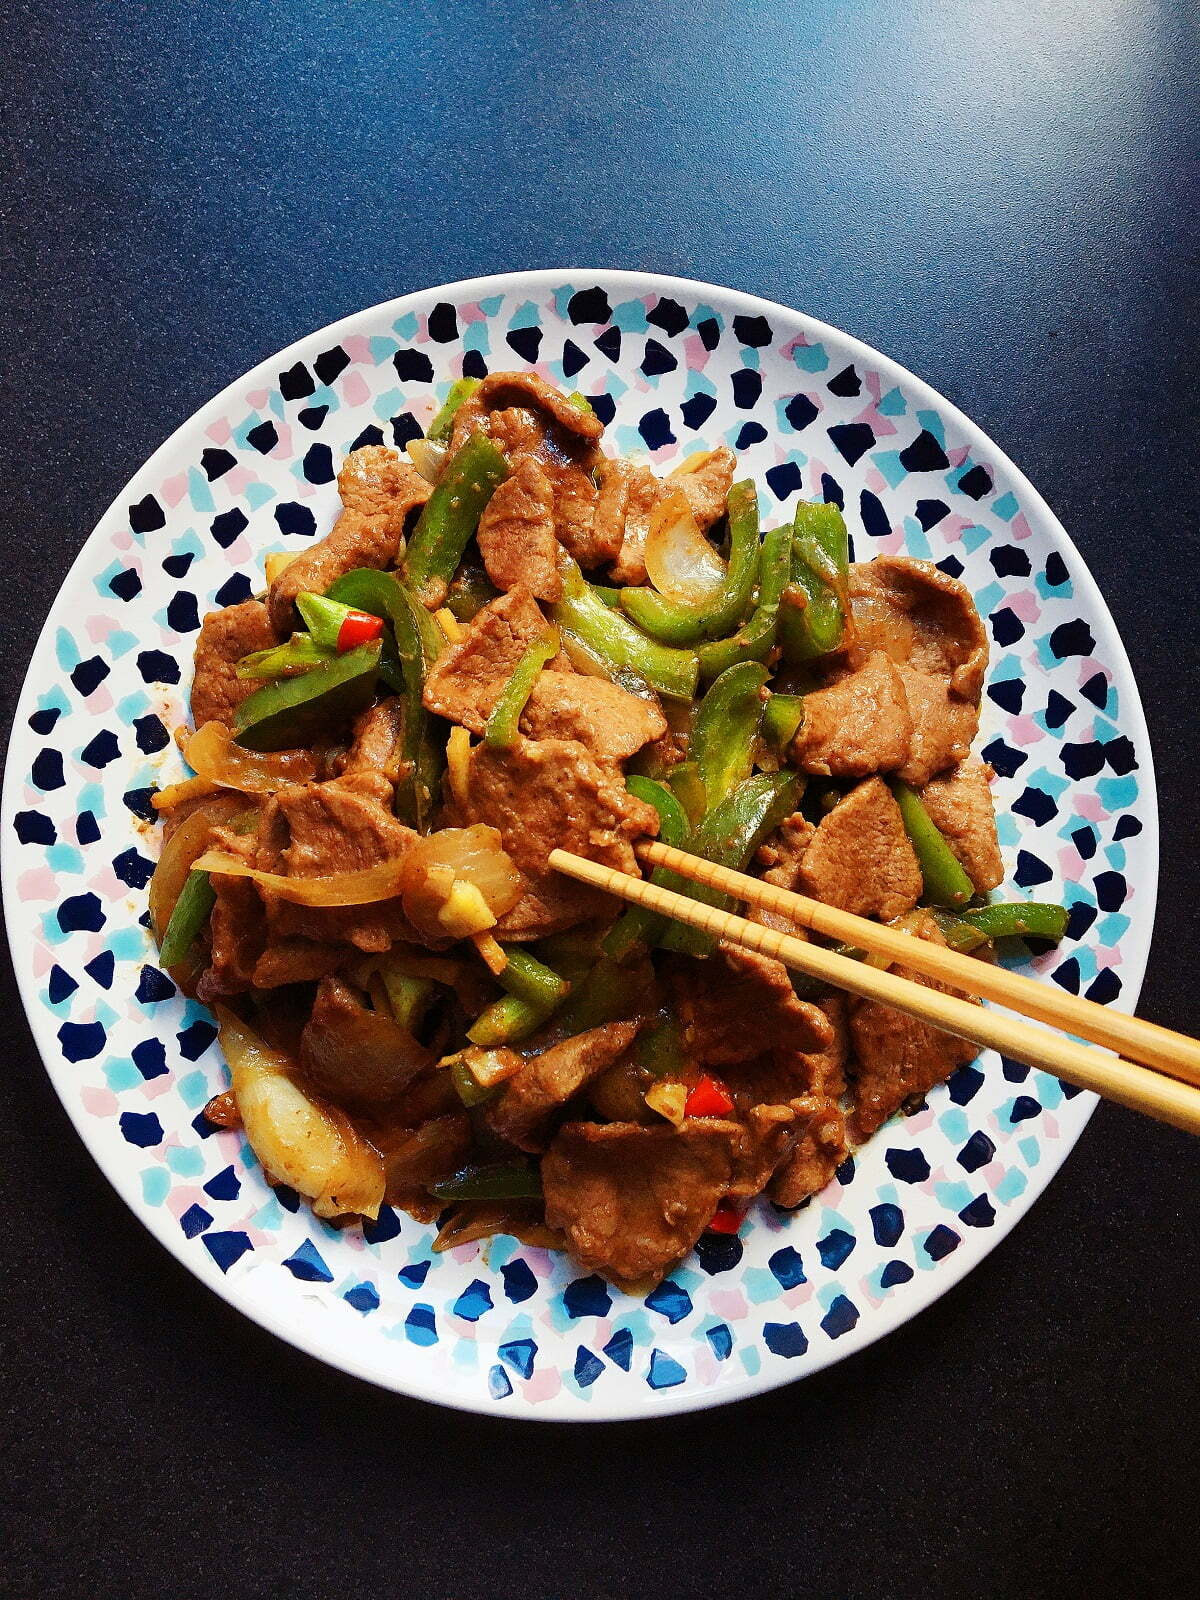 Yummy Stir-Fry Beef with Green Peppers (青椒炒牛肉)